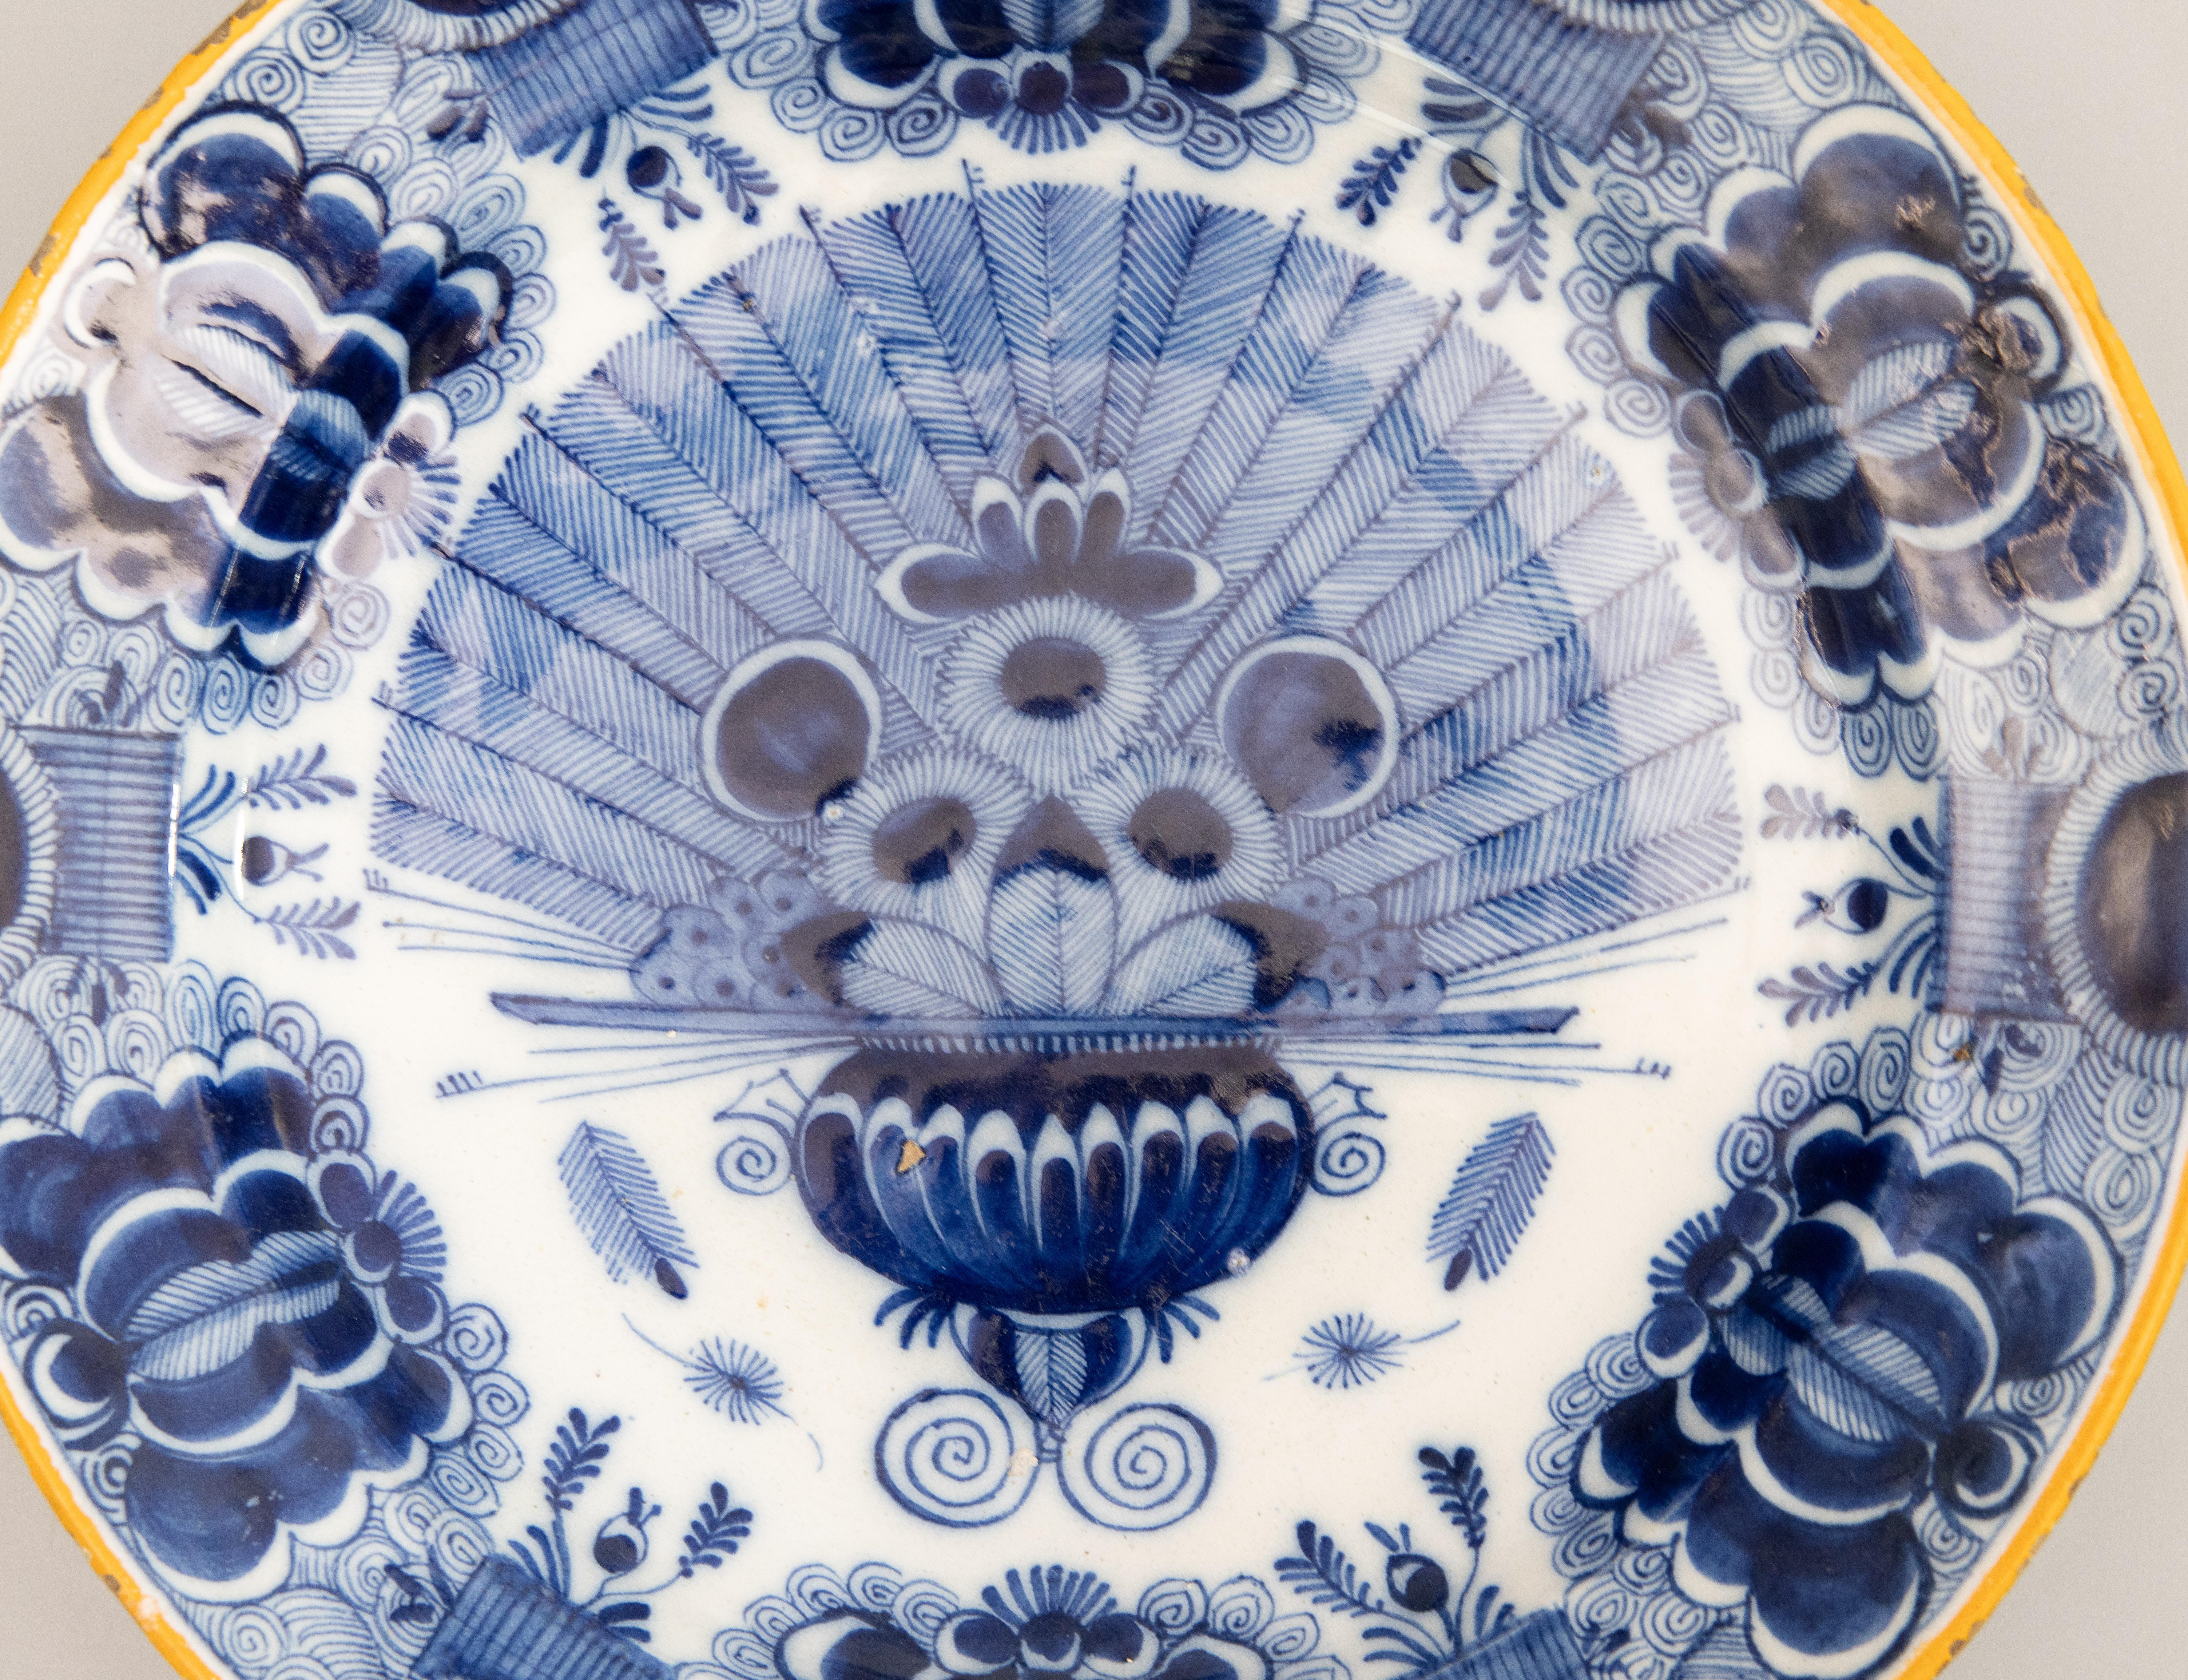 A superb antique 18th-Century Dutch Delft faience charger with the 'Peacock' pattern, circa 1750. Maker's mark on reverse: MQ/J for Quirinus Mesch. This lovely large 13.8